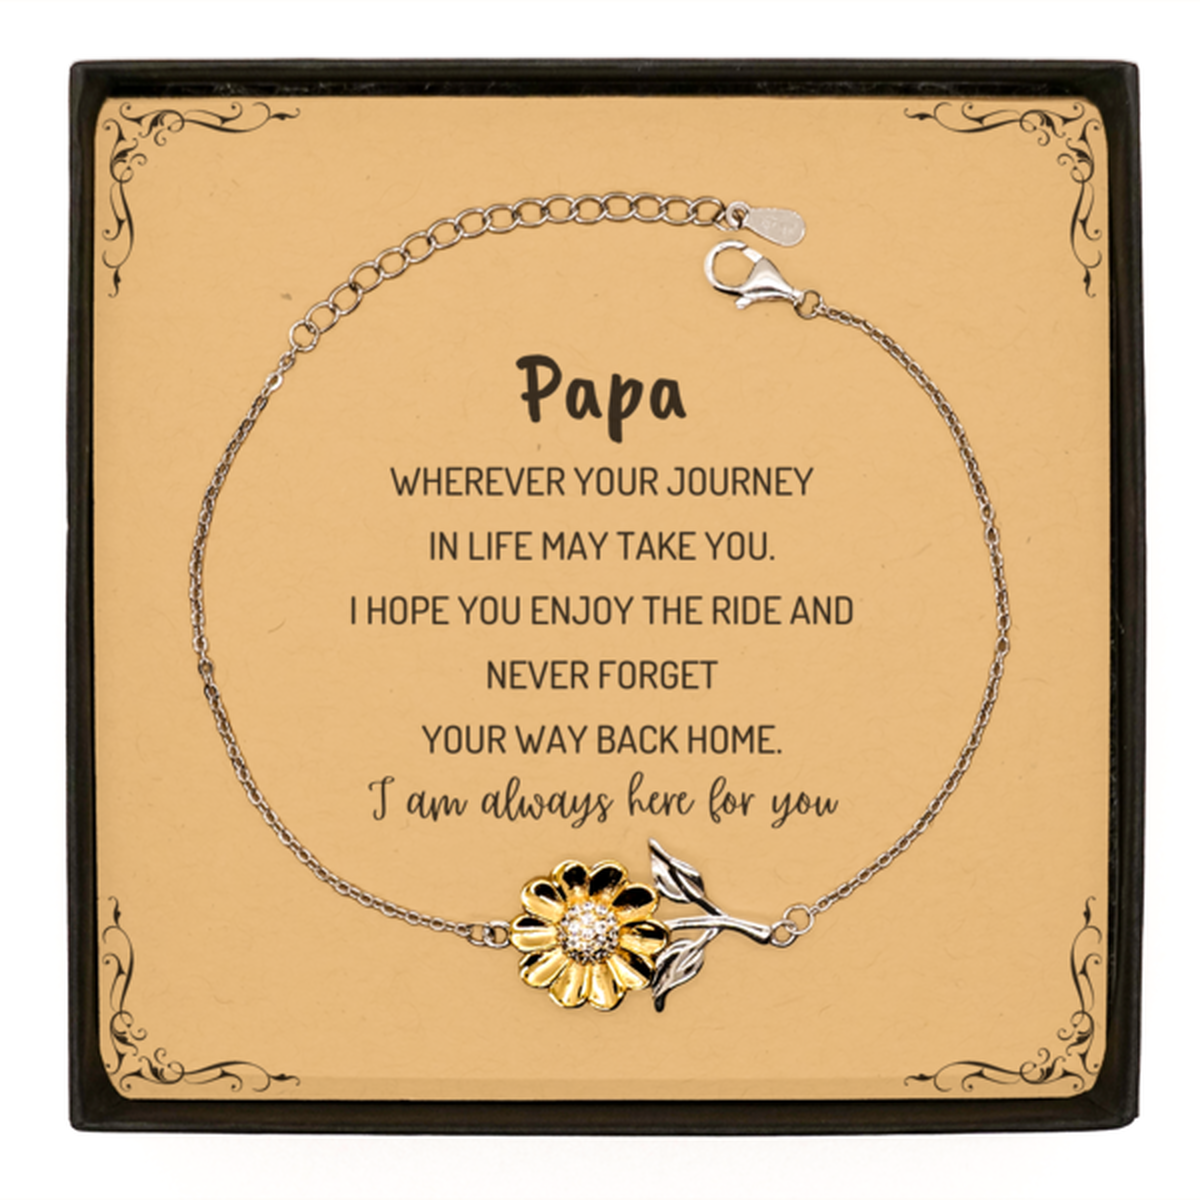 Papa wherever your journey in life may take you, I am always here for you Papa Sunflower Bracelet, Awesome Christmas Gifts For Papa Message Card, Papa Birthday Gifts for Men Women Family Loved One